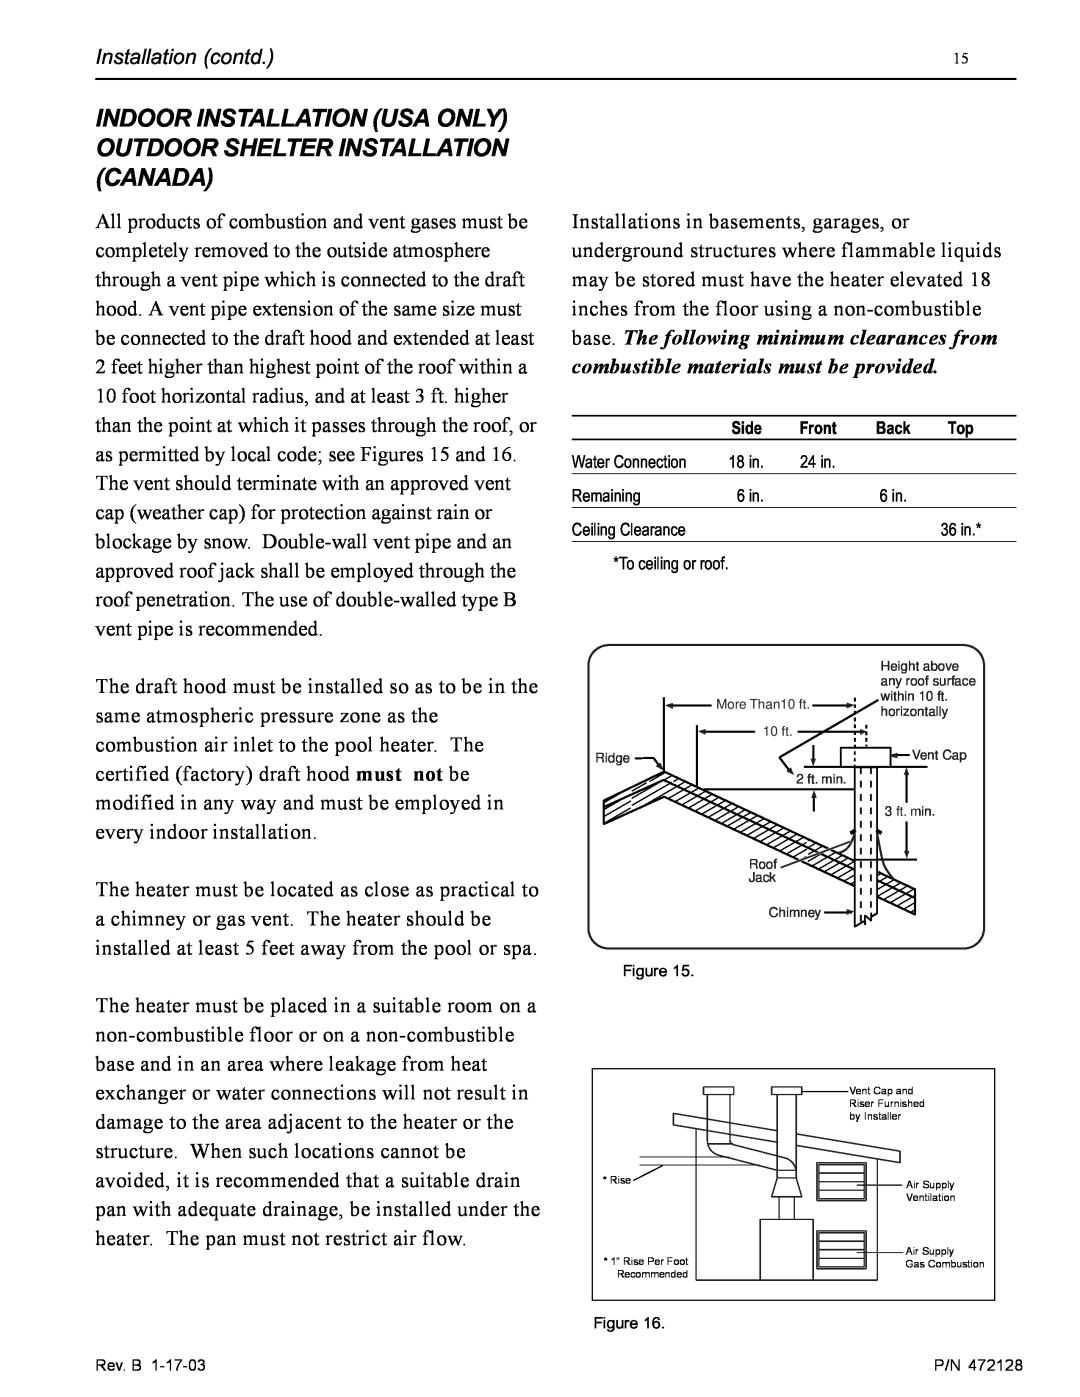 Pentair CH installation manual Front, Water Connection, 24 in, Remaining, 6 in, Ceiling Clearance, Side, Rev. B, Figure P/N 